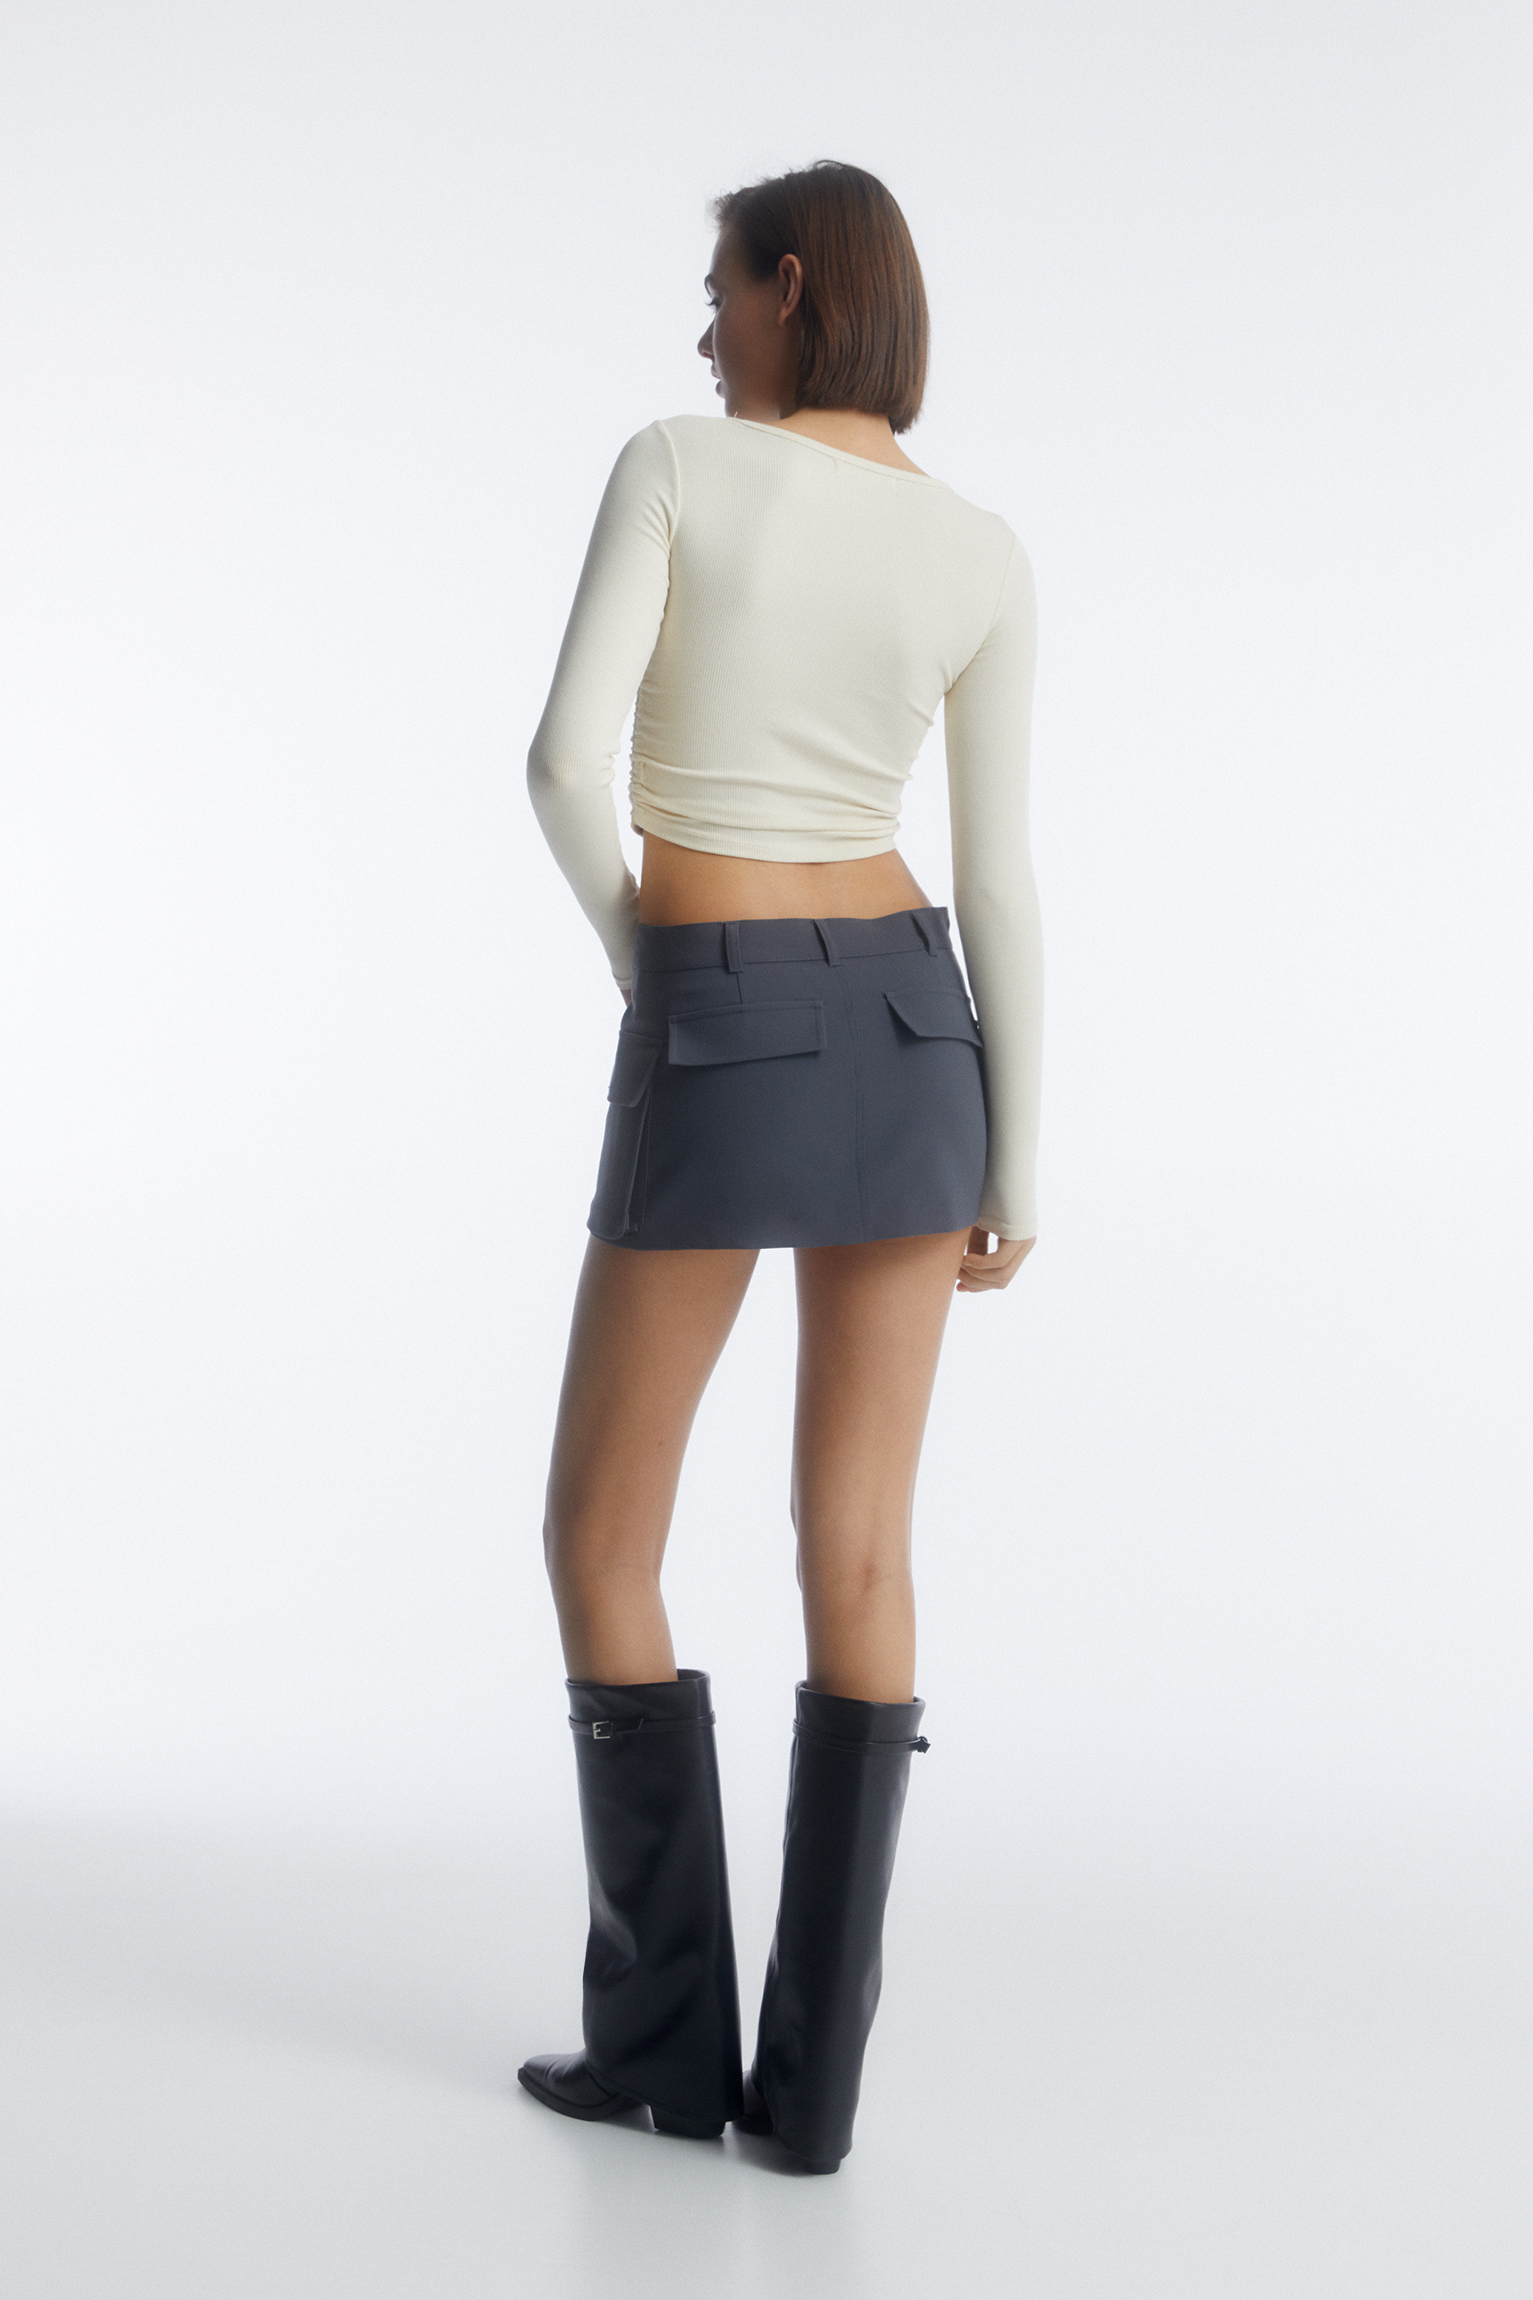 Mini skirt with pockets